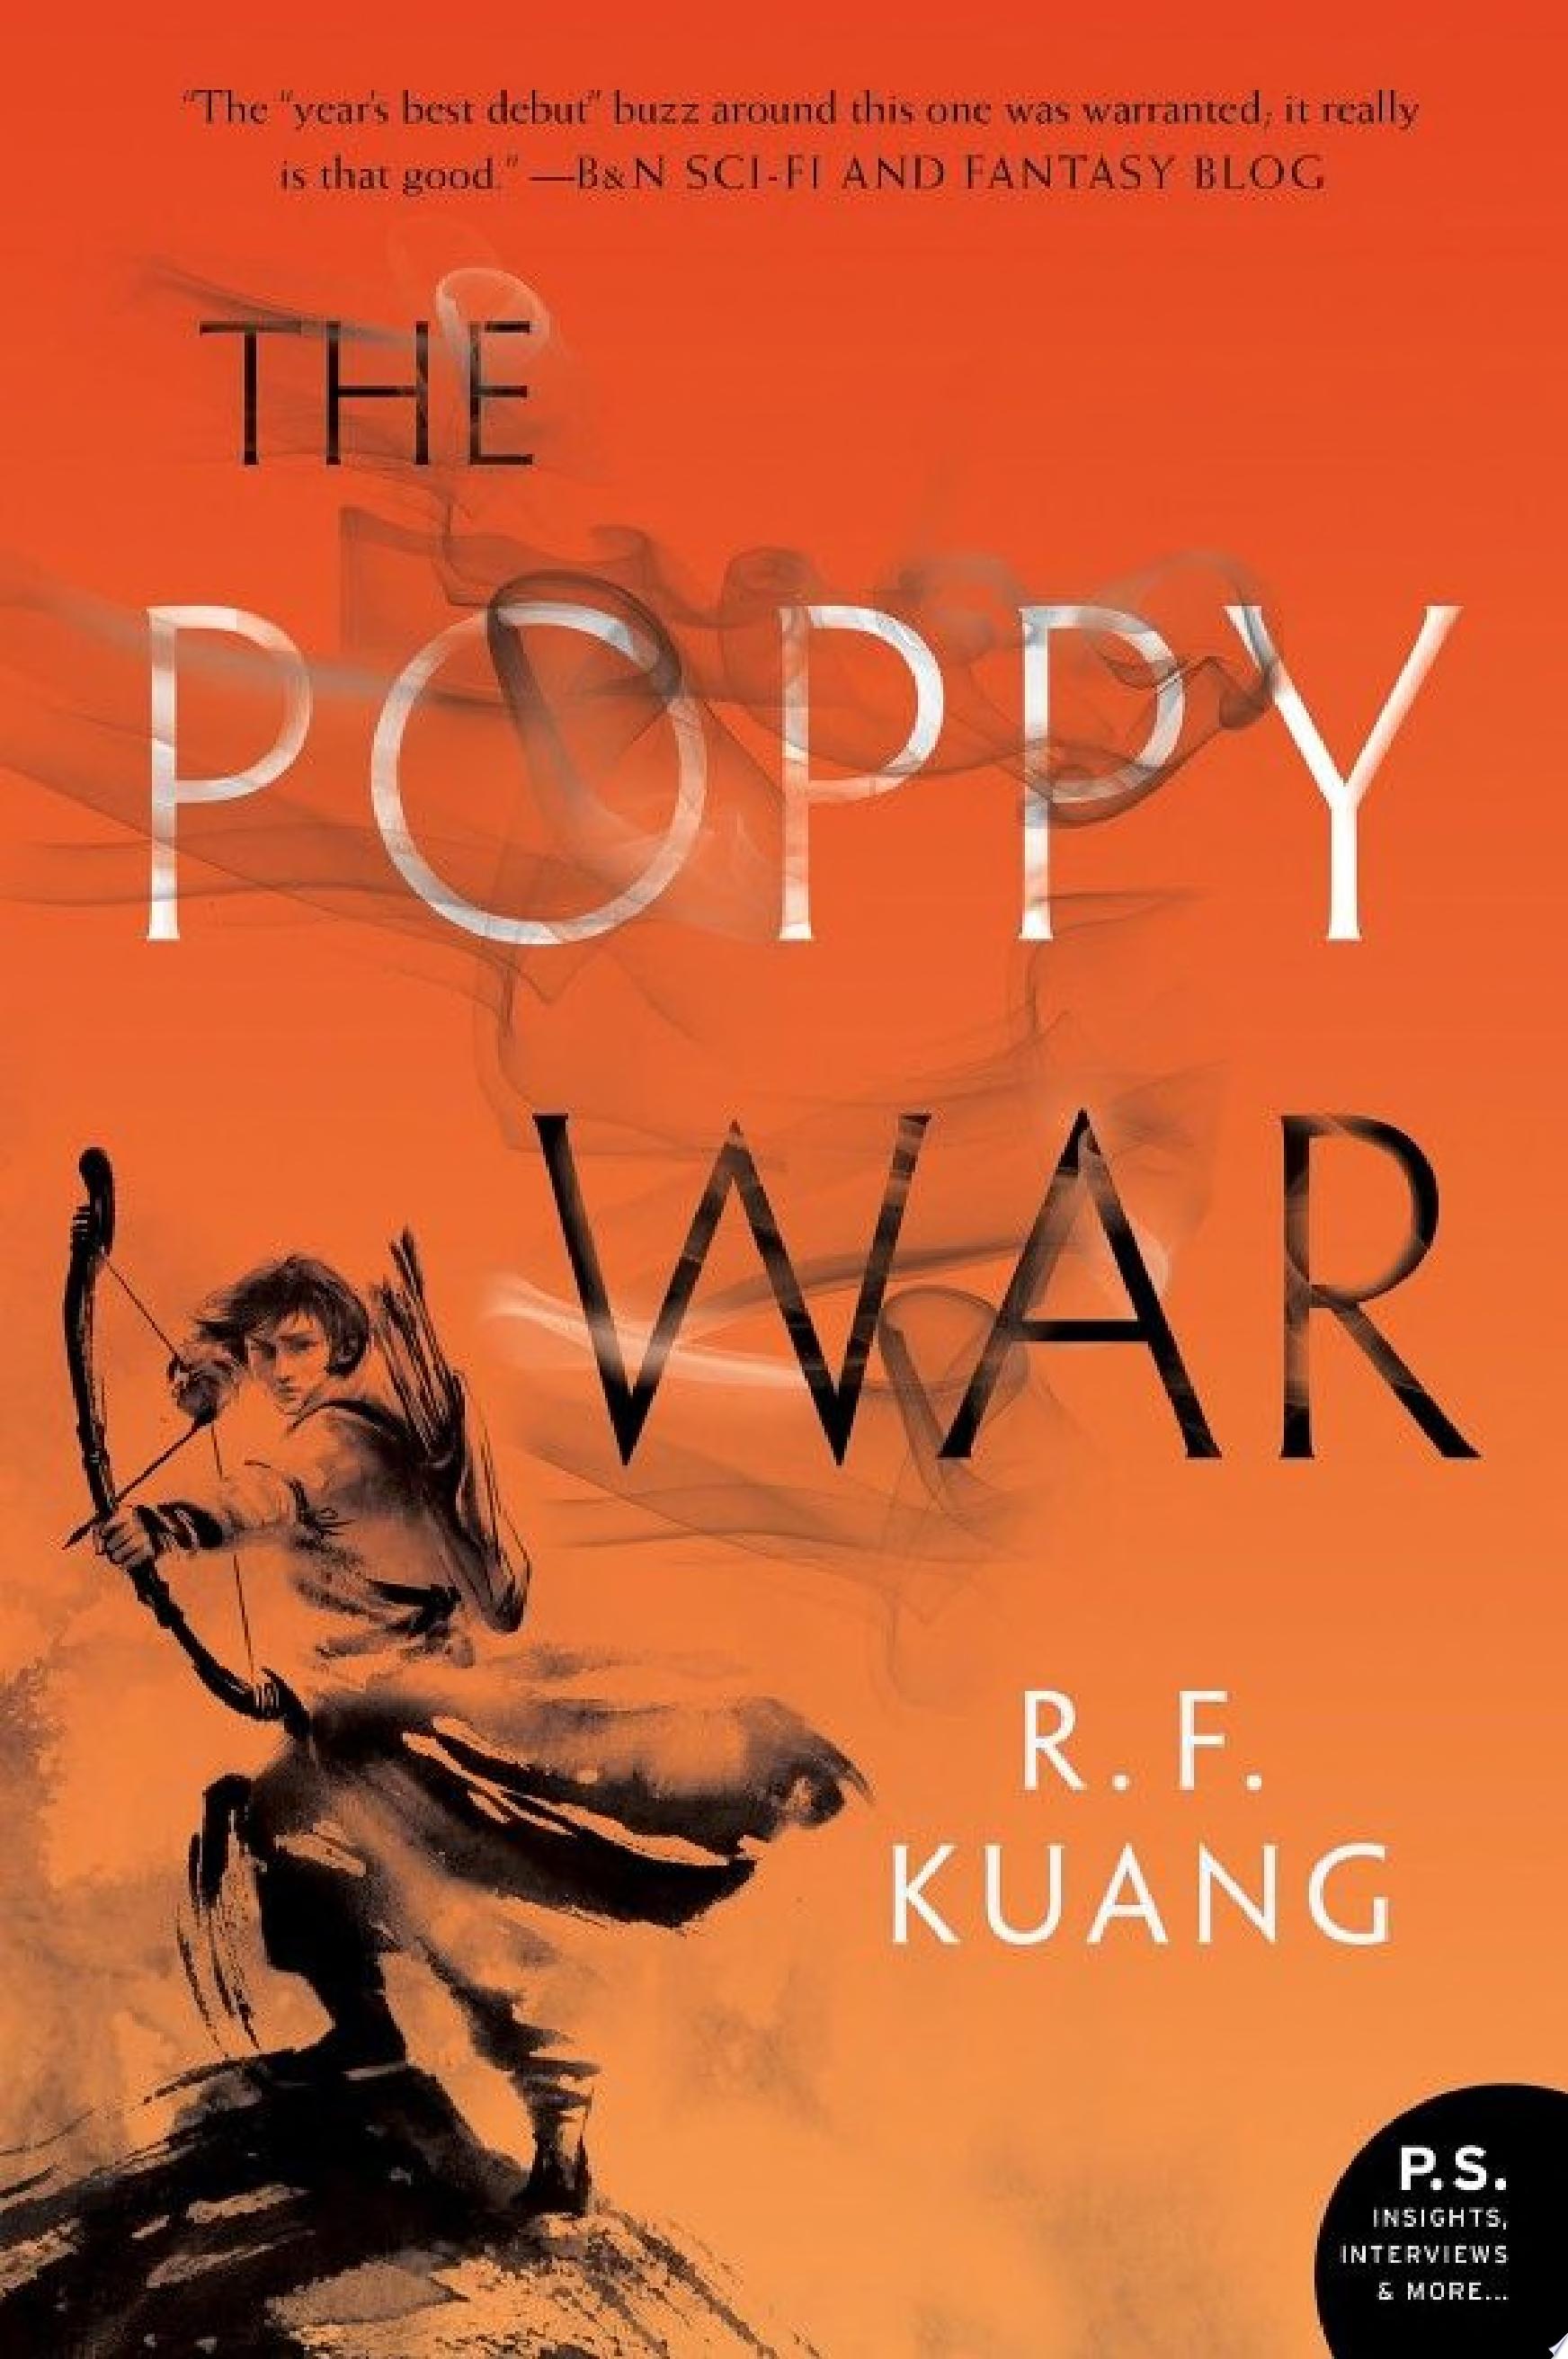 Image for "The Poppy War"